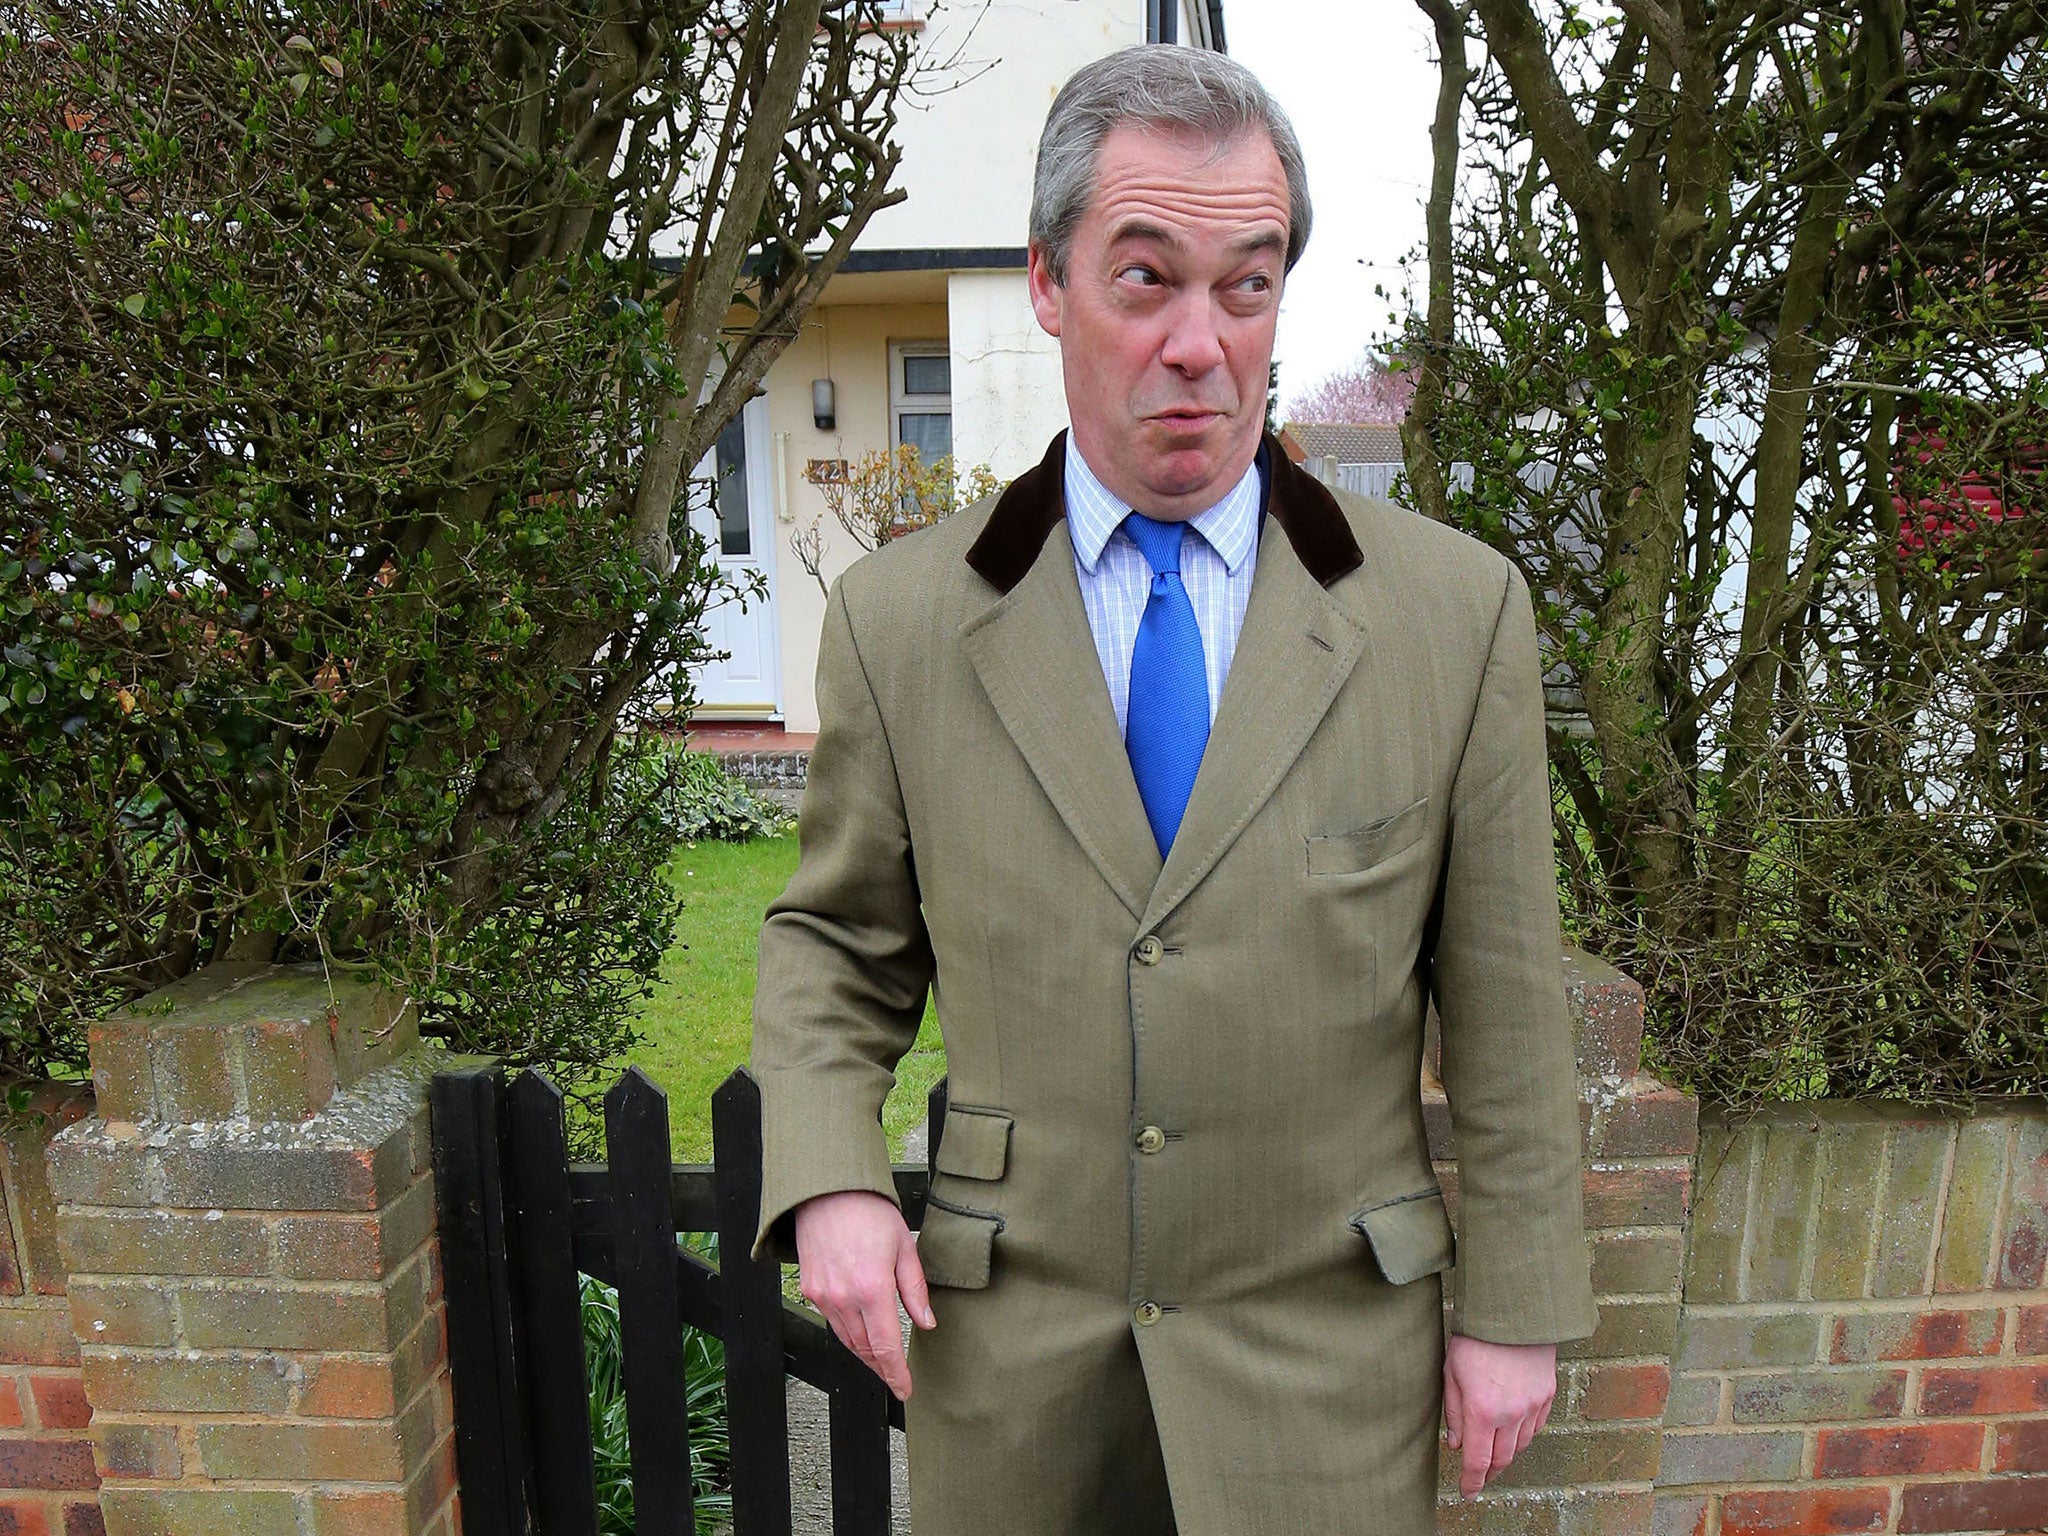 Nigel Farage pictured during campaigning in Broadstairs, Kent, on Easter Monday